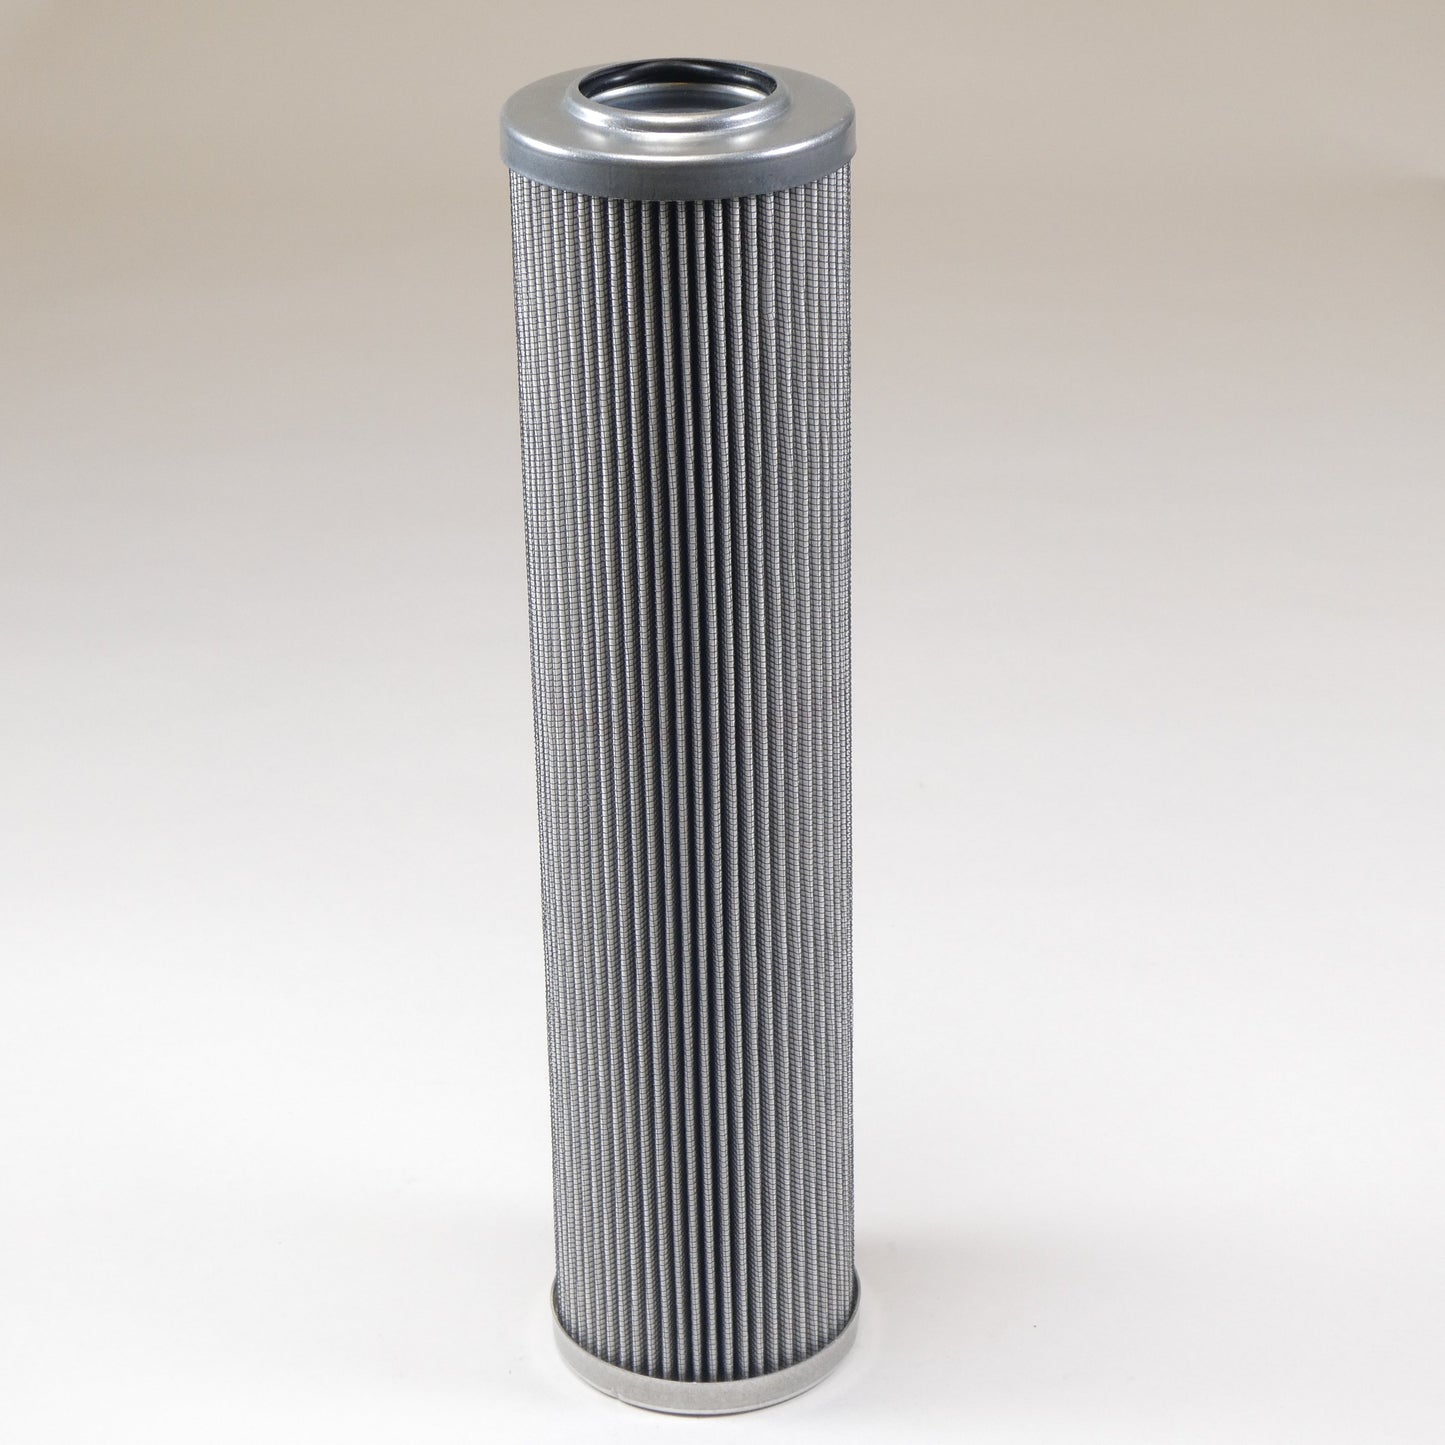 Hydrafil Replacement Filter Element for Hilco 3830-14-015-C